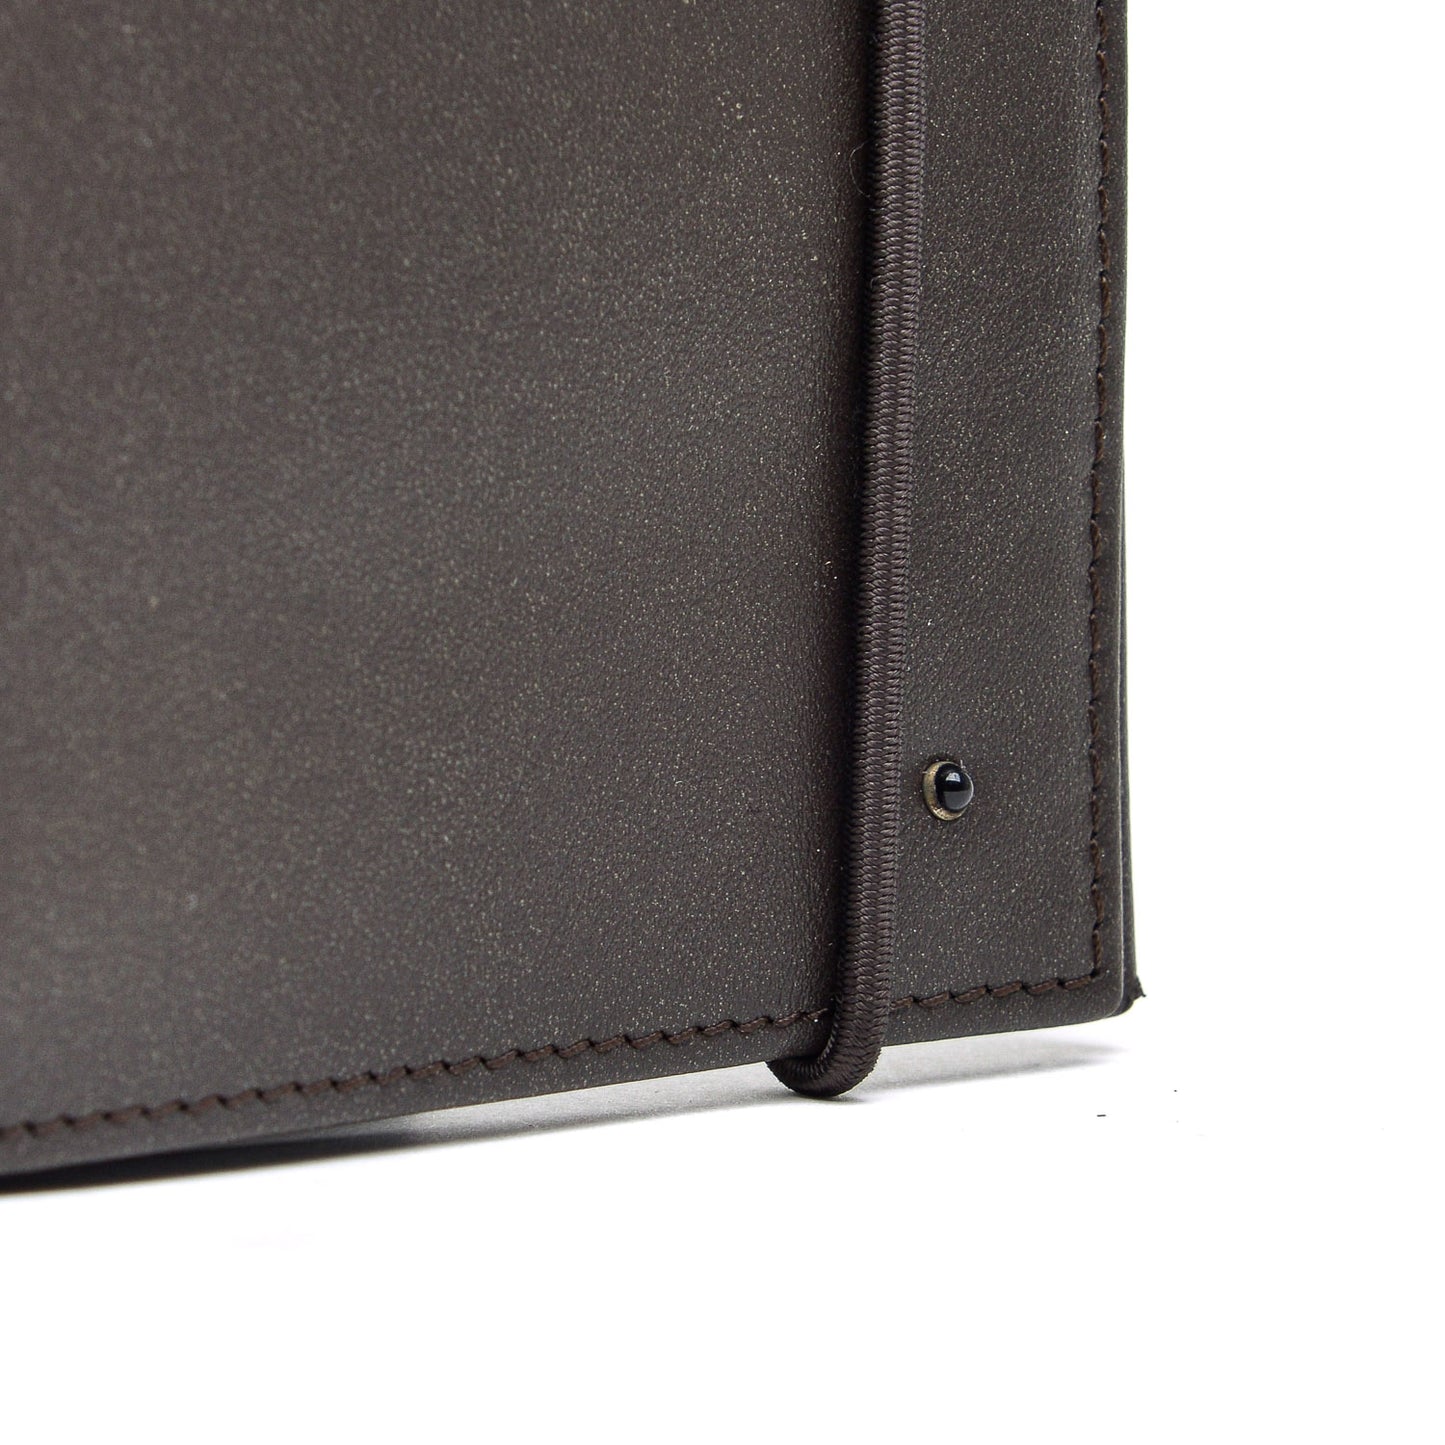 Classic Folding Wallet 1 side Leather Dark Brown